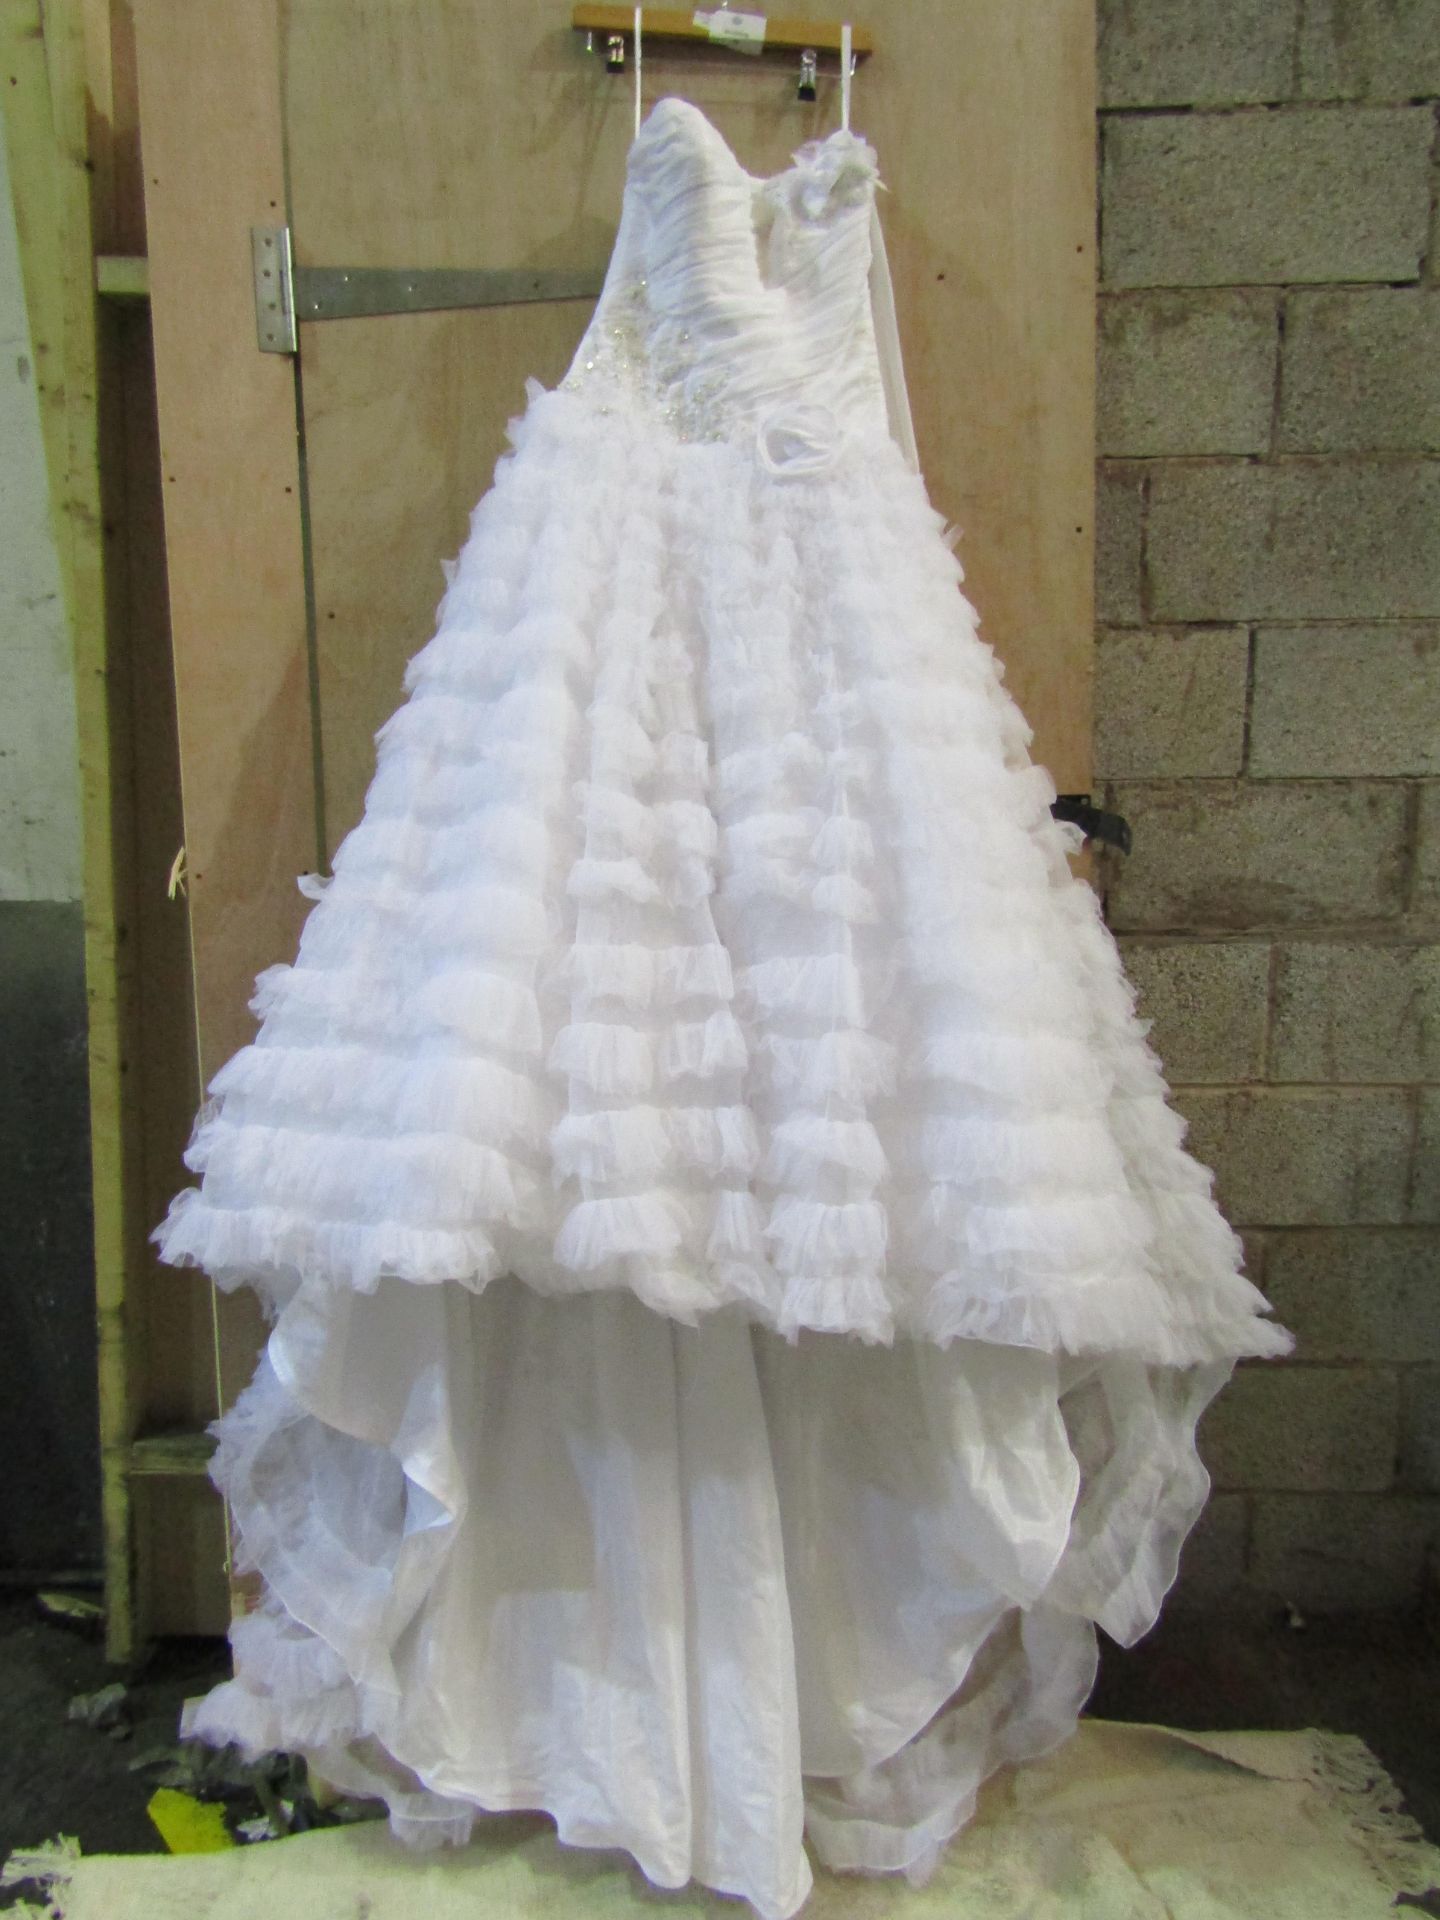 Approx 500 pieces of wedding shop stock to include wedding dresses, mother of the bride, dresses, - Image 97 of 108